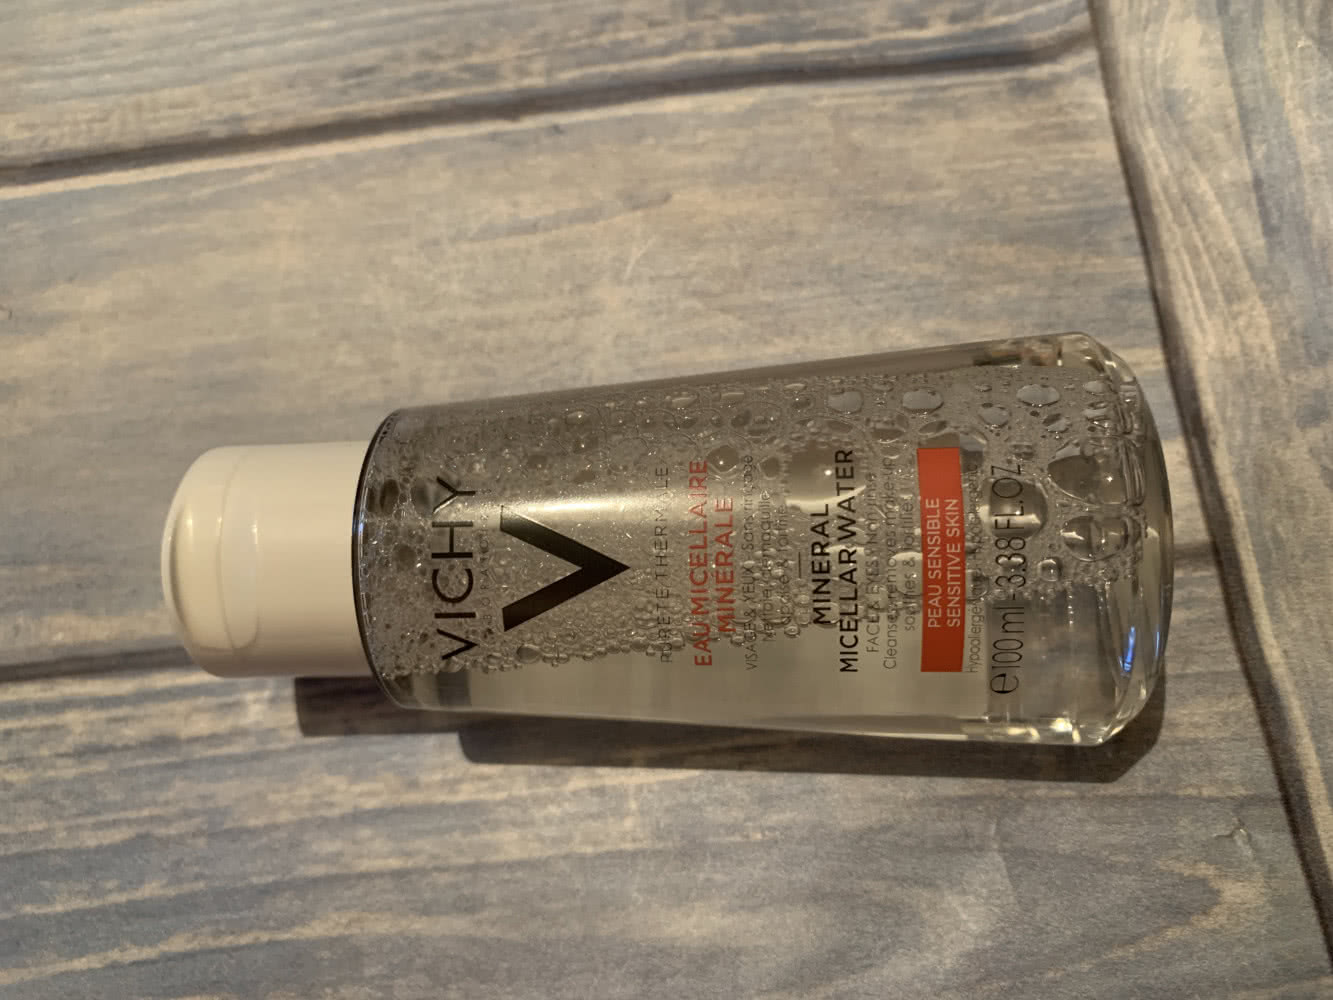 Vichy Purete Thermale Mineral Micellar Water, 100ml